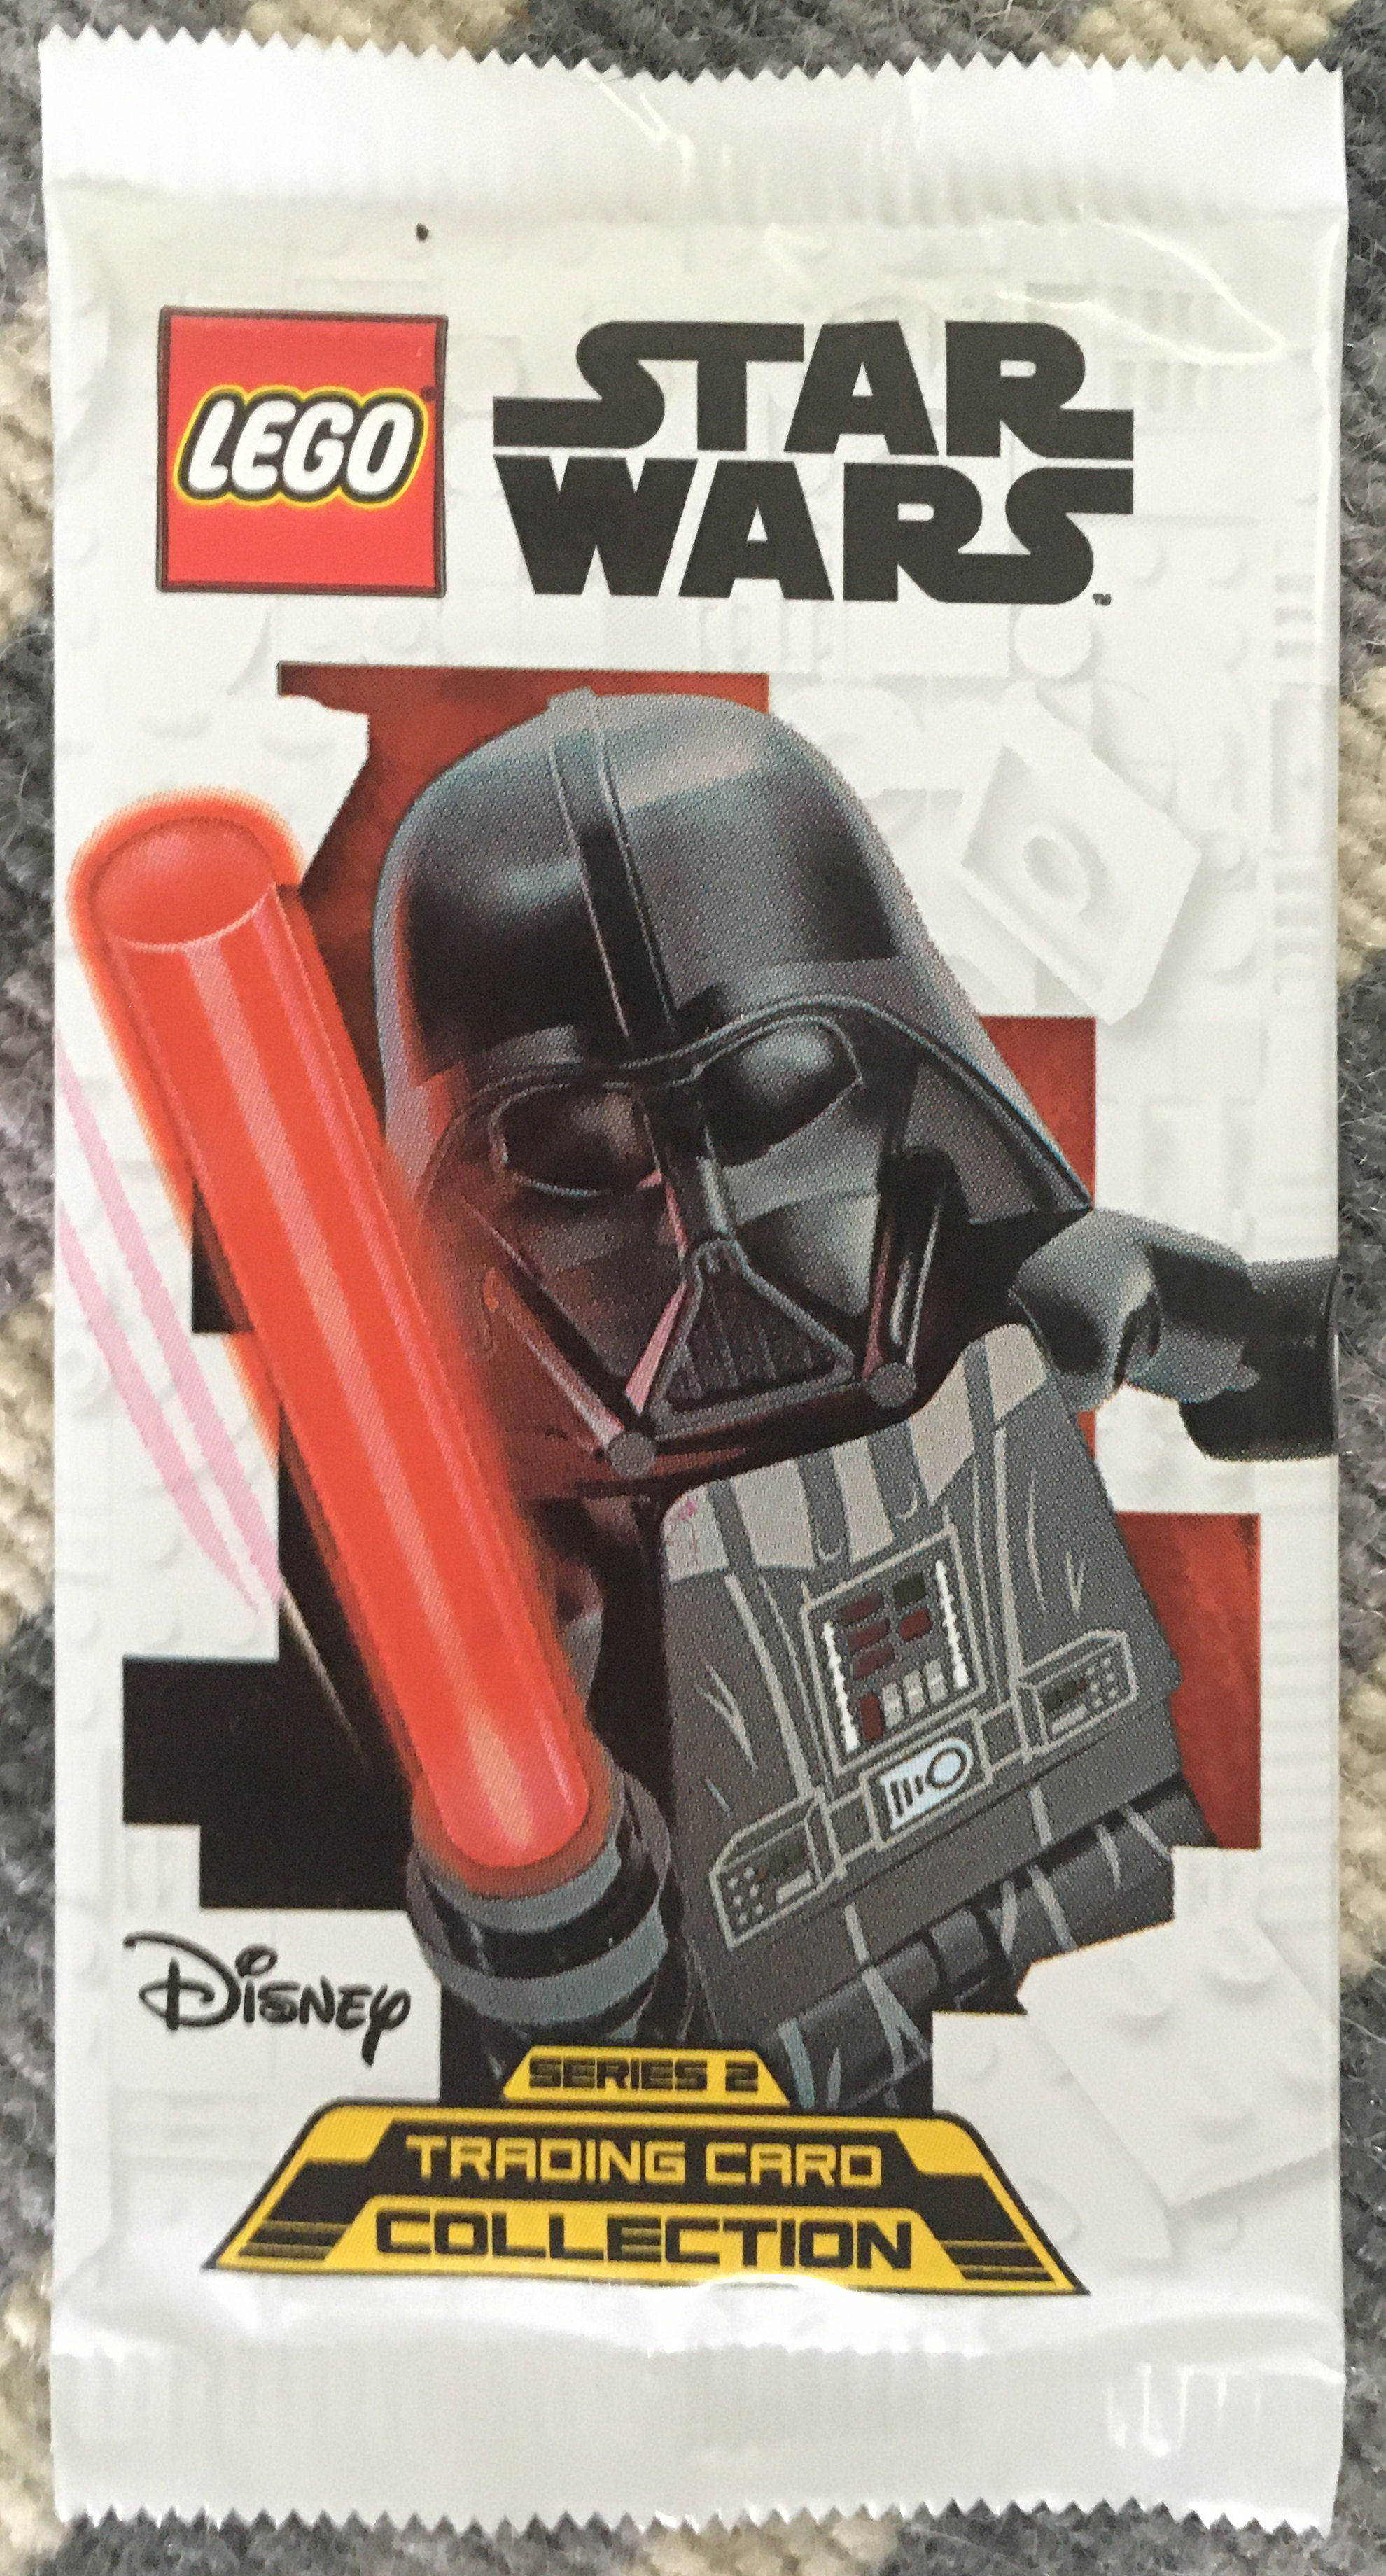 LEGO Star Wars Trading Card Game Serie 2 LE8 Kylo Ren Limited Edition